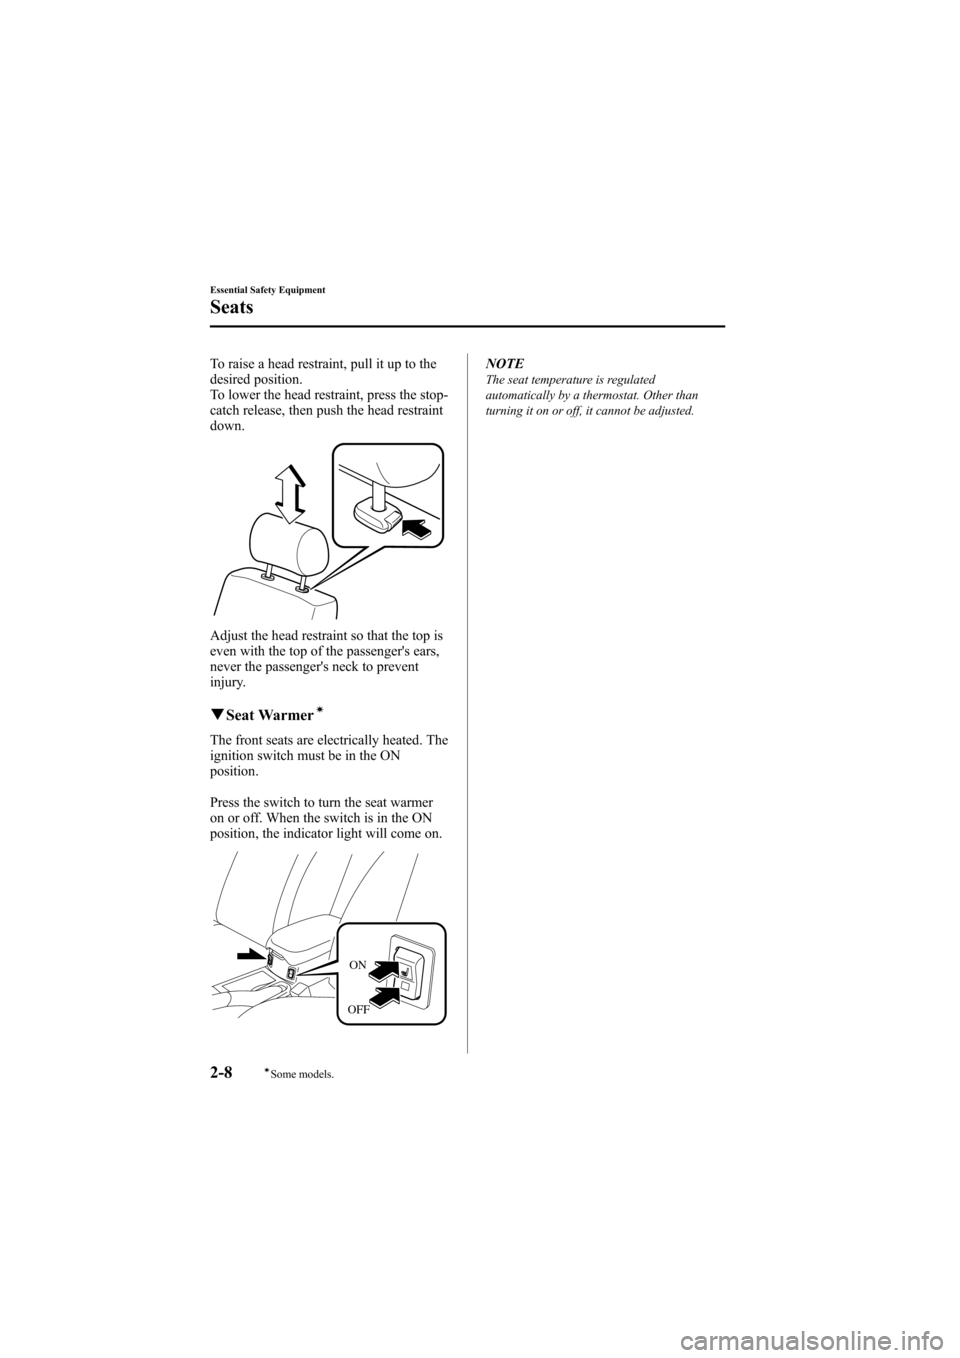 MAZDA MODEL 6 2008  Owners Manual (in English) Black plate (22,1)
To raise a head restraint, pull it up to the
desired position.
To lower the head restraint, press the stop-
catch release, then push the head restraint
down.
Adjust the head restrai